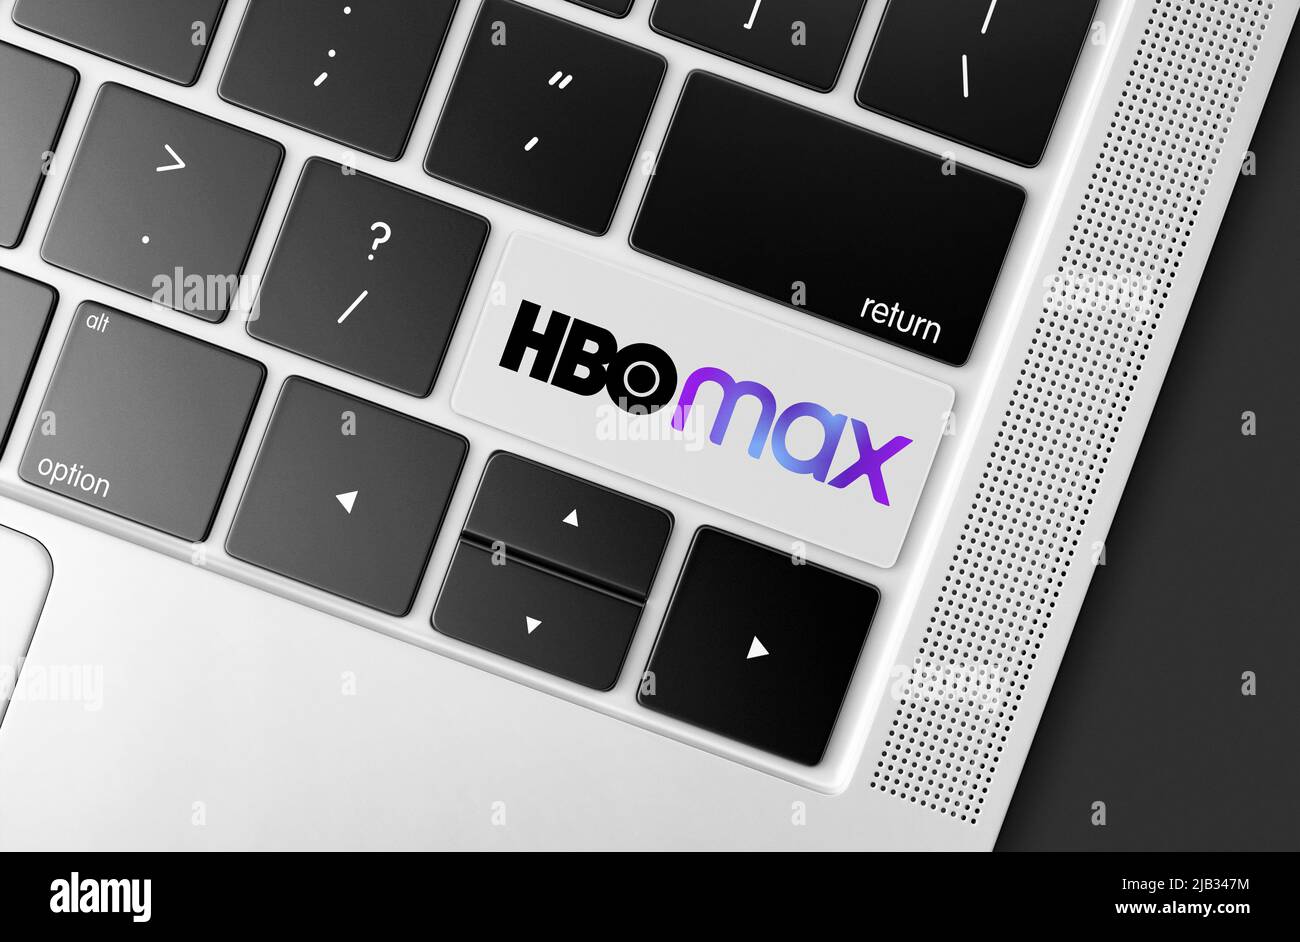 Dedicated HBO Max video streming platform key on computer keyboard, concept picture of global communications Stock Photo